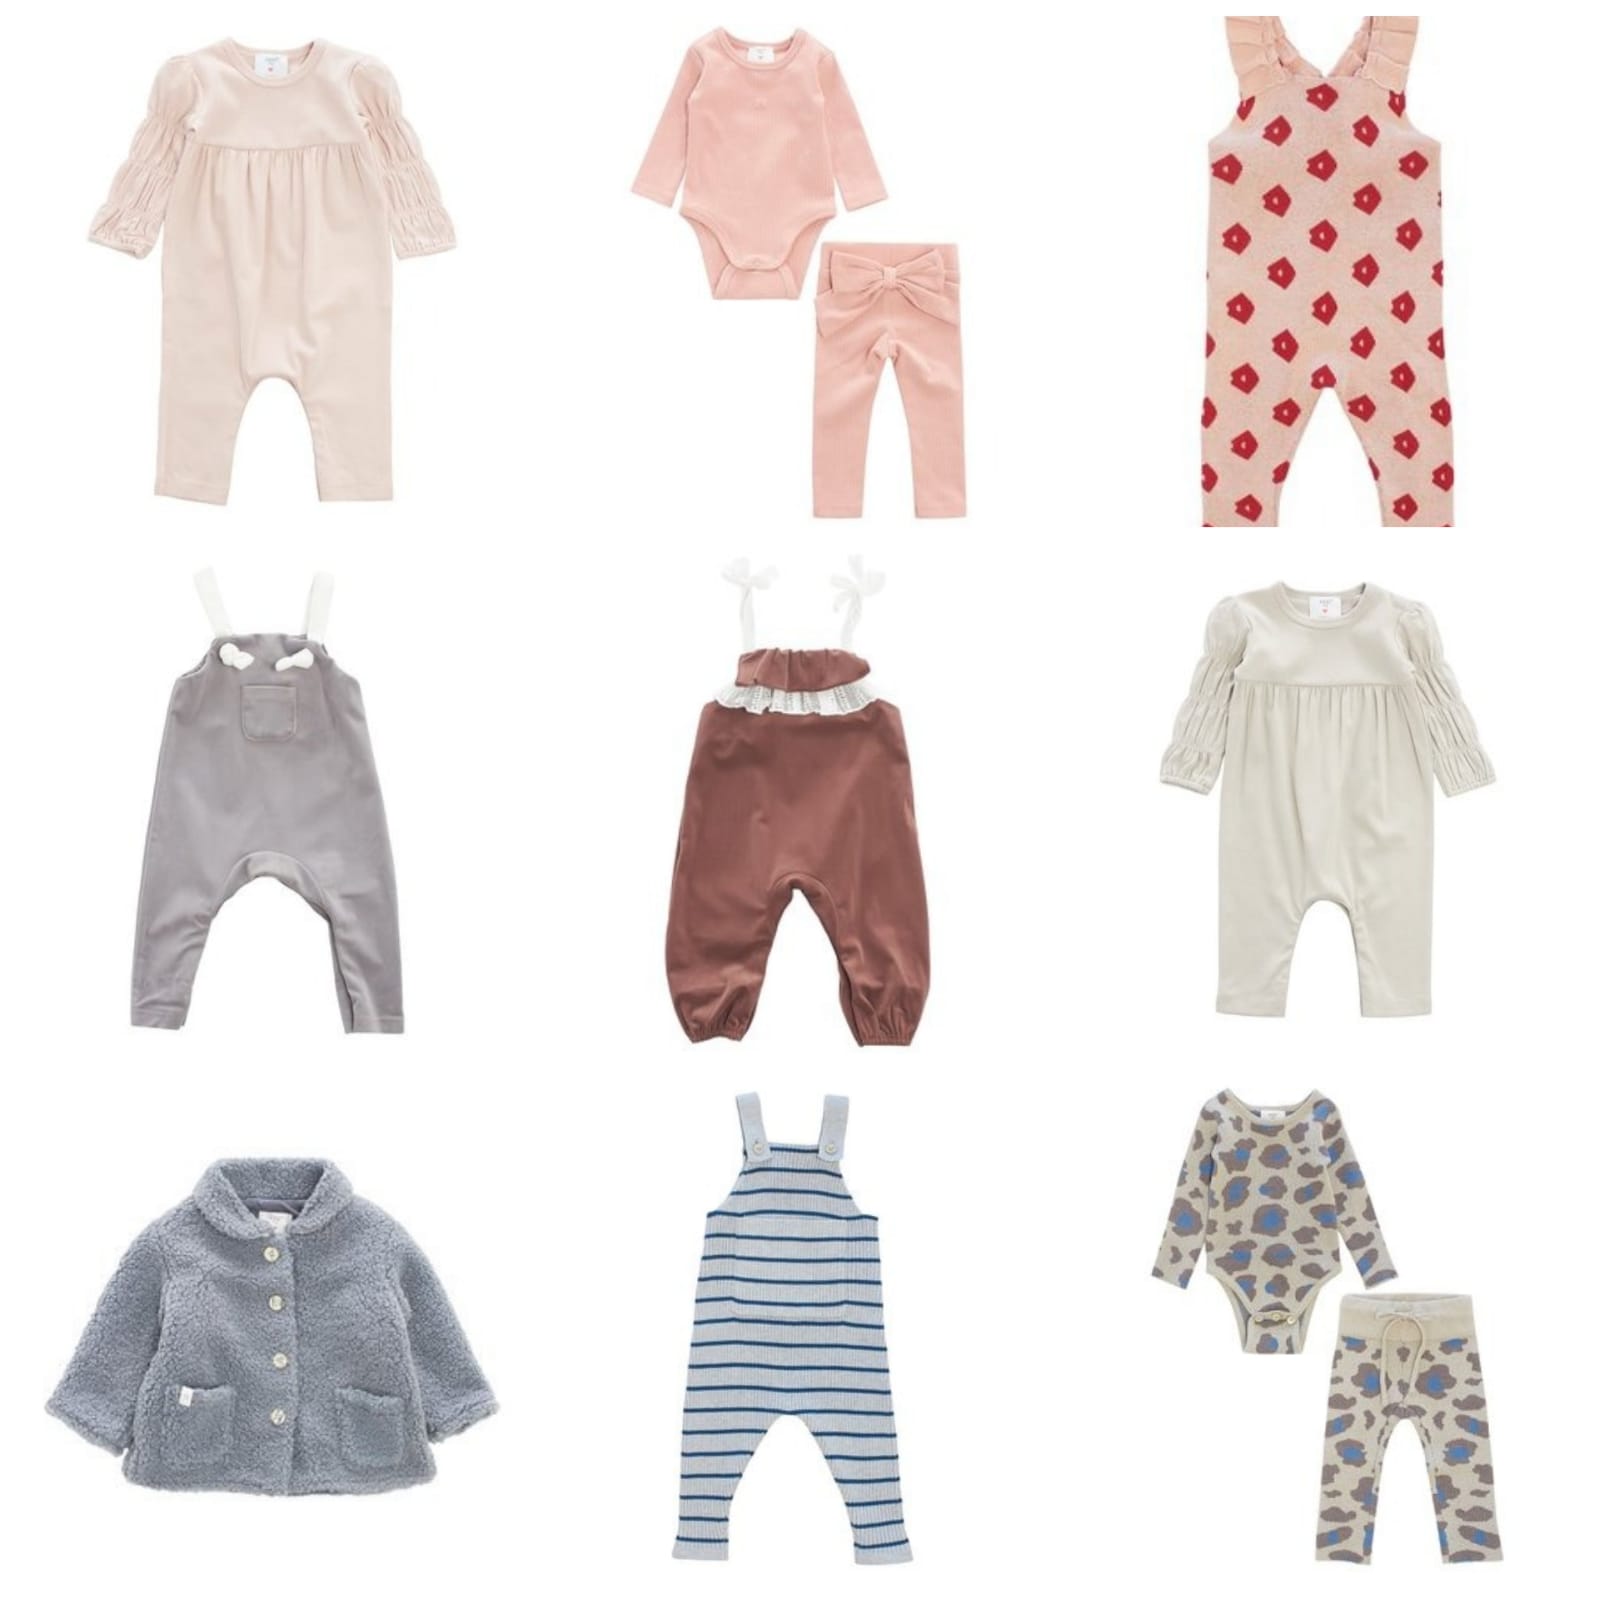 Sale on KIPP Kipp Baby x Lindsi Lane up to 50% off (More Available)